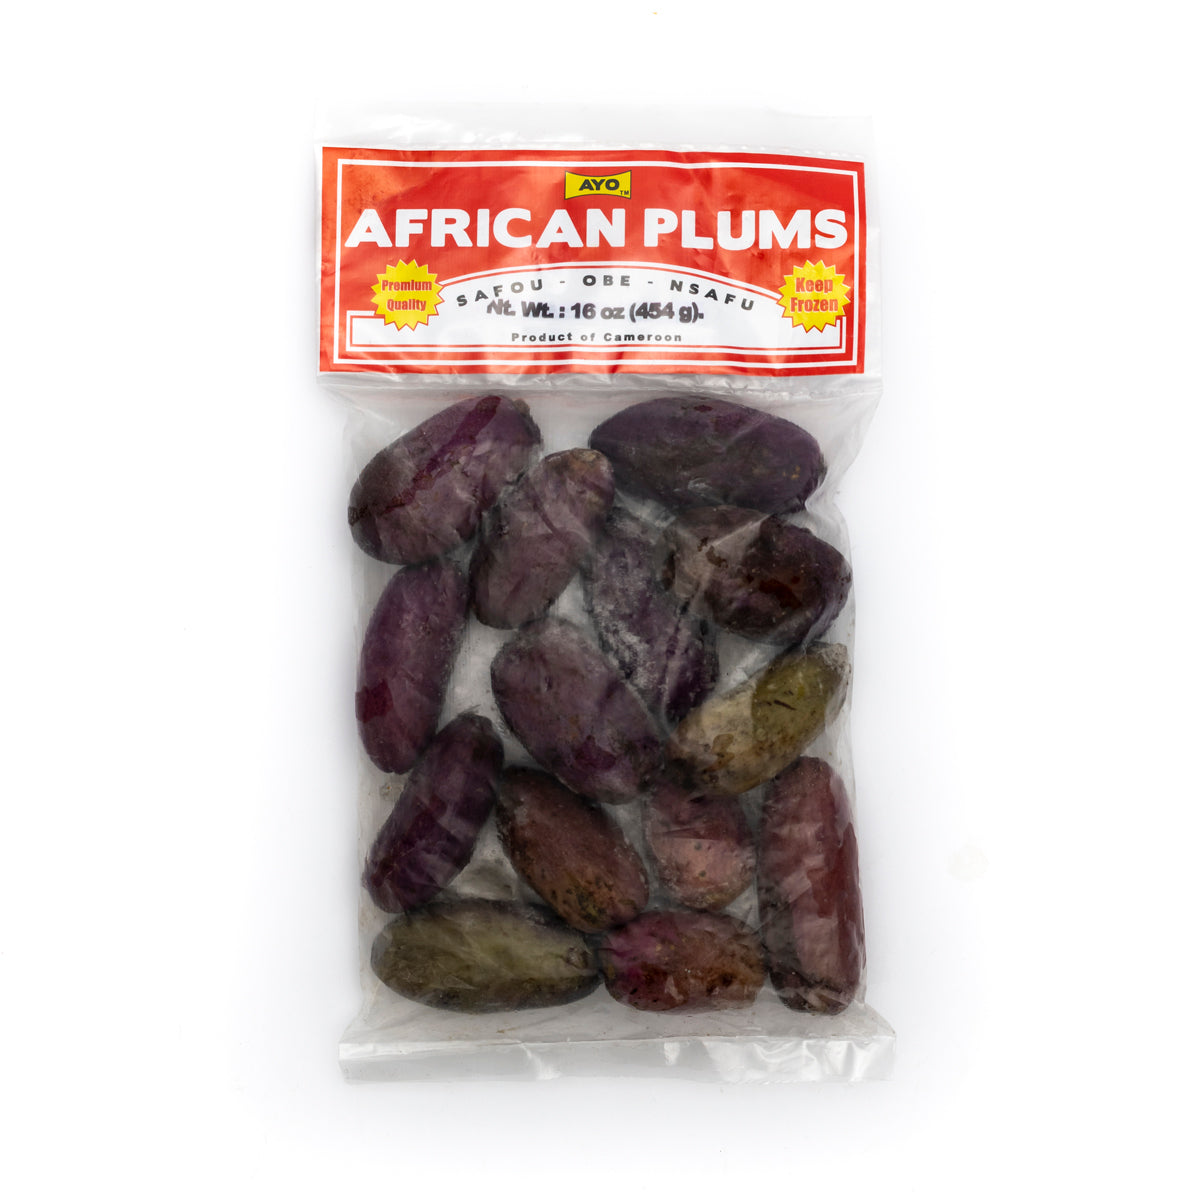 African plums